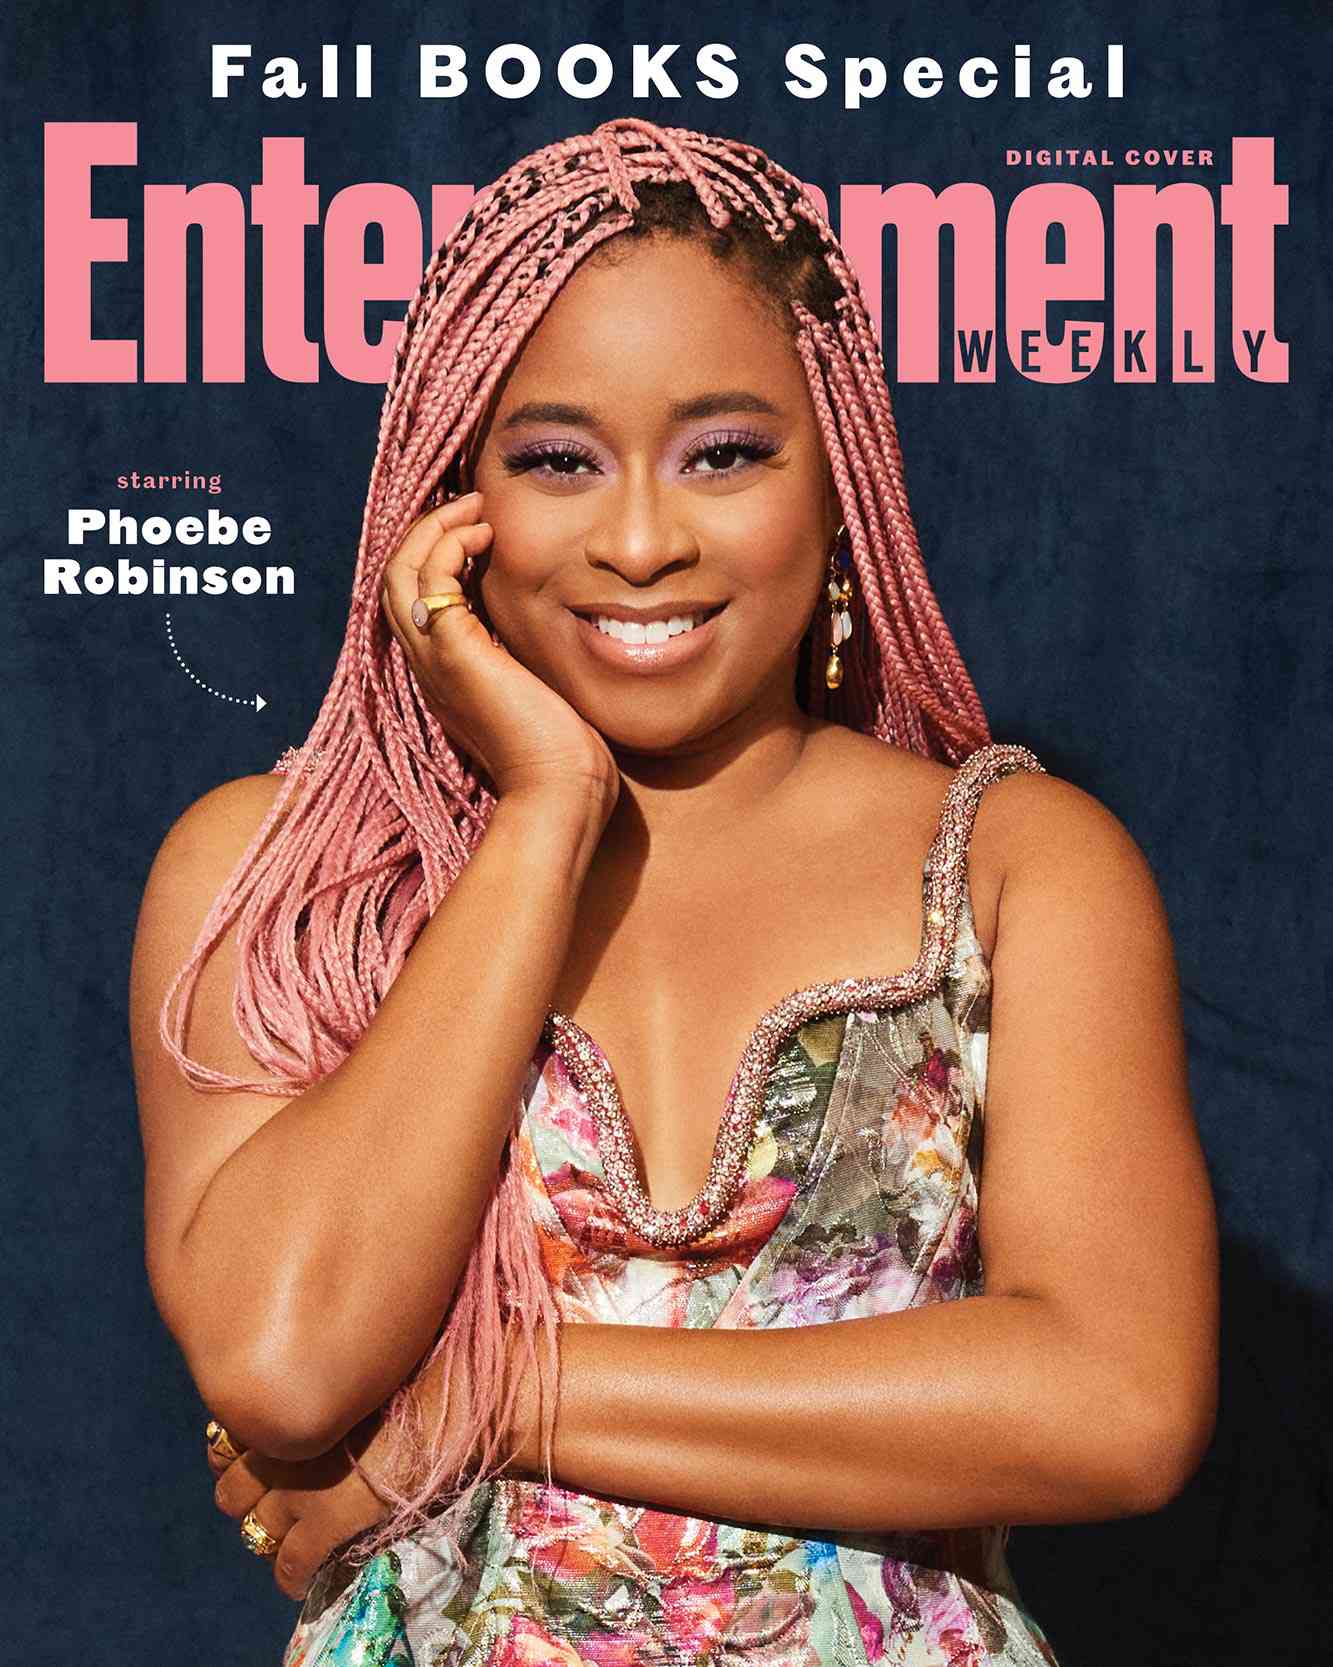 Fall Books Digital cover with Phoebe Robinson